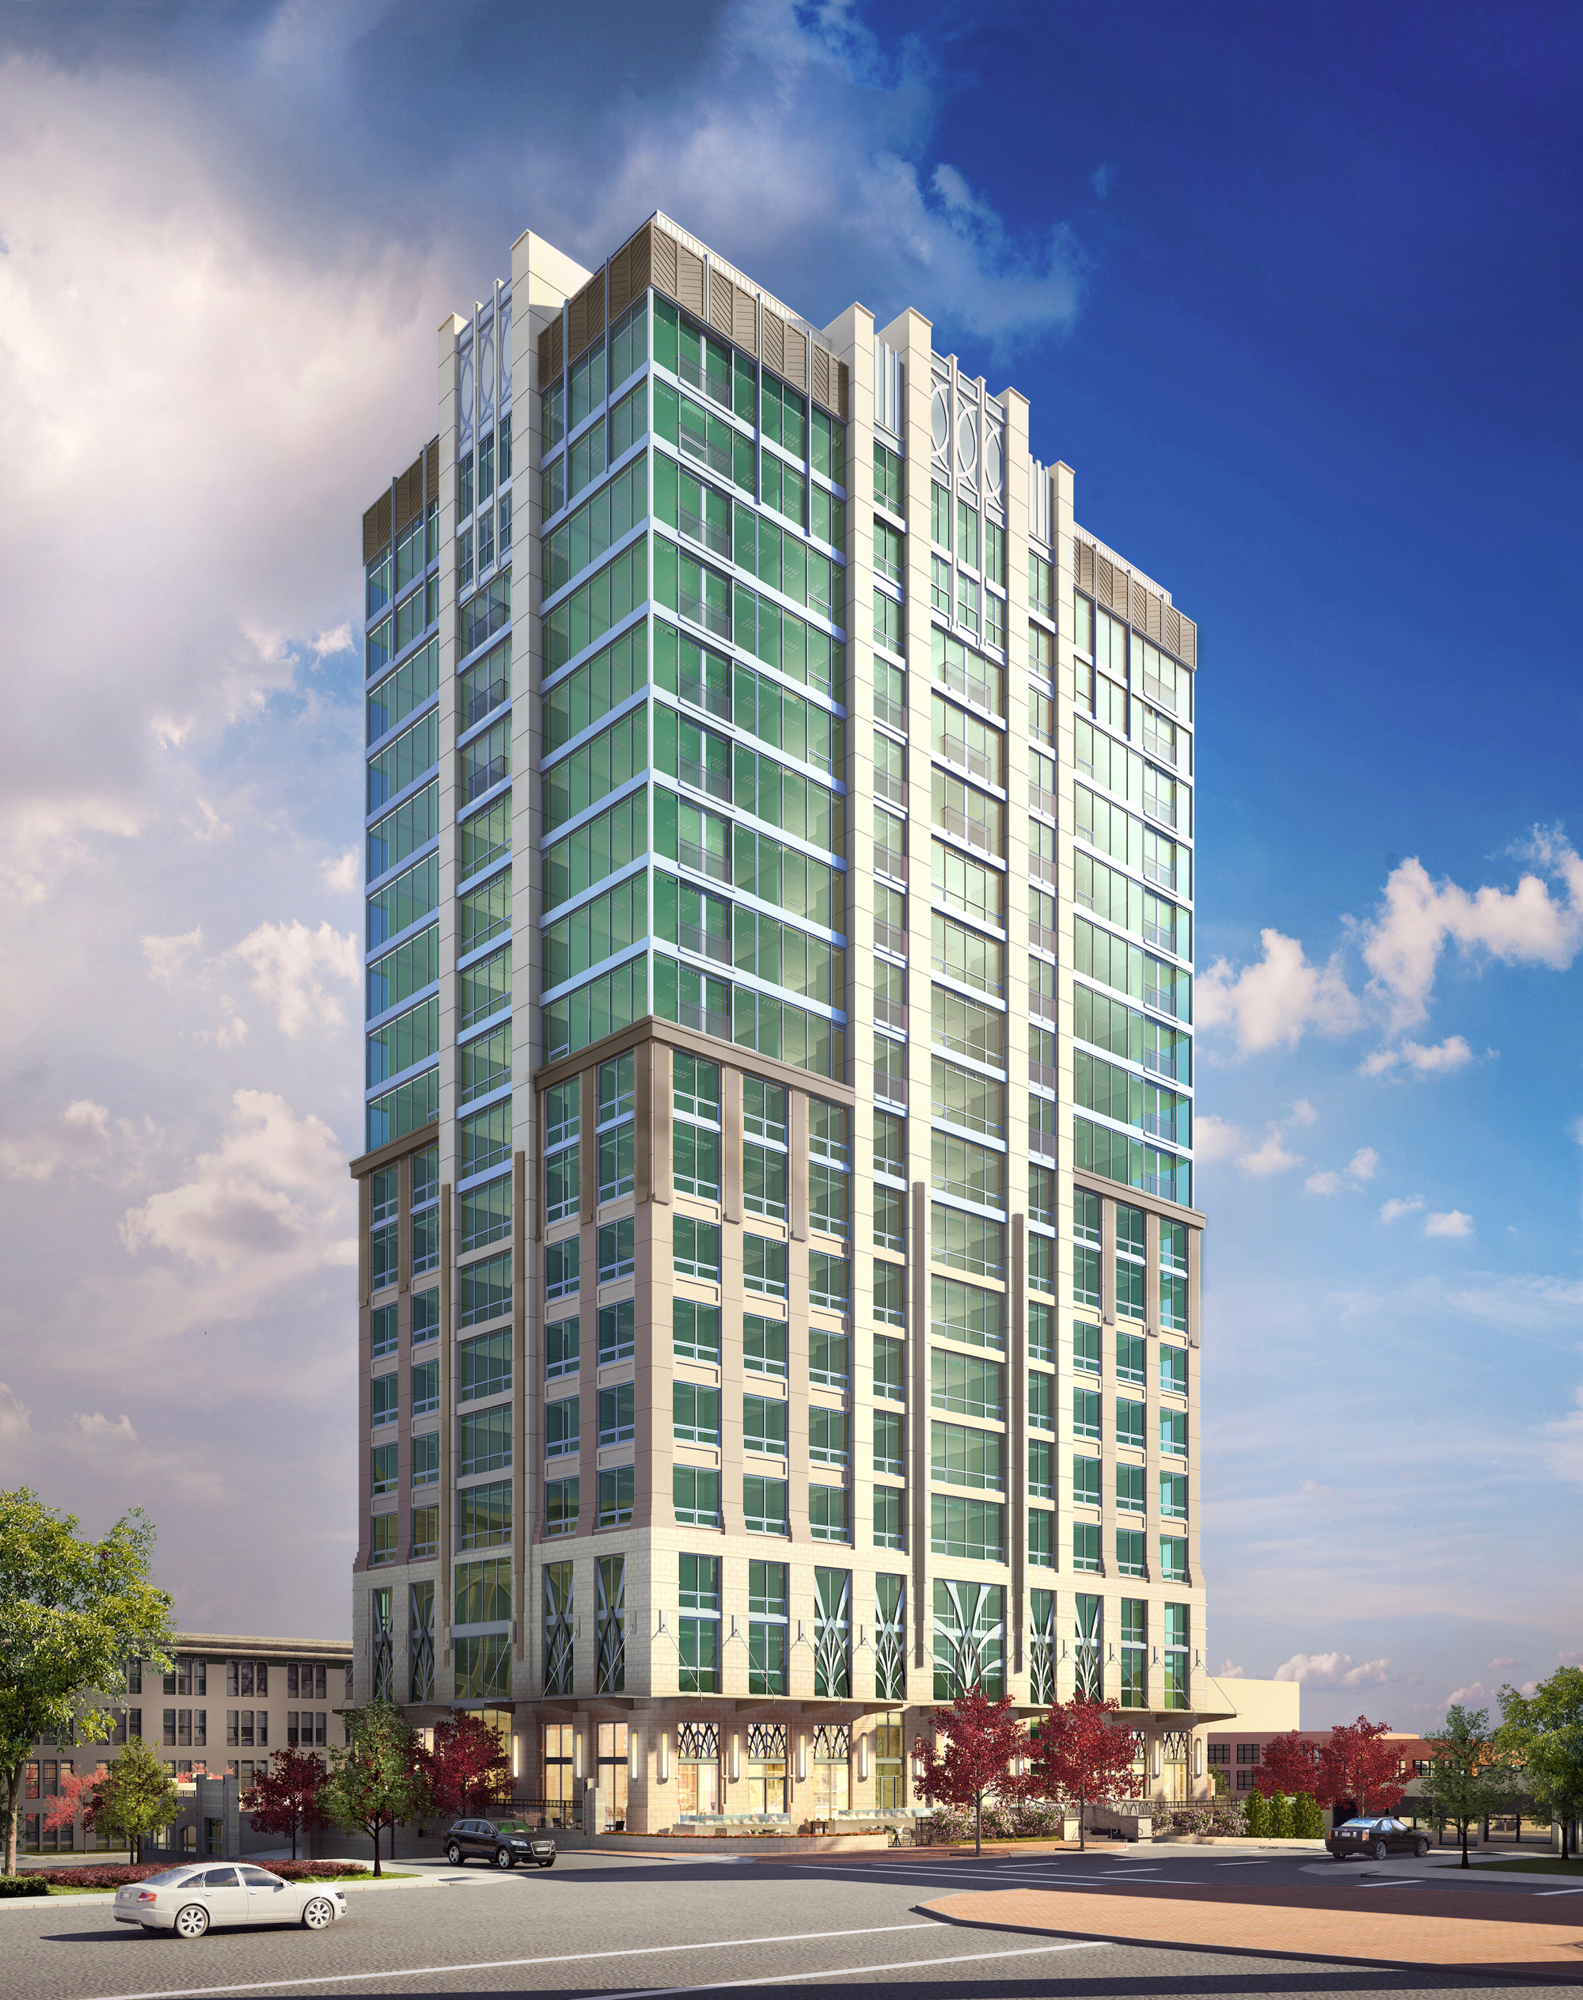 COURTESY RENDERING — The Kimpton Hotel Arras, which McKibbon will both own and manage, will debut in Asheville, N.C., this August